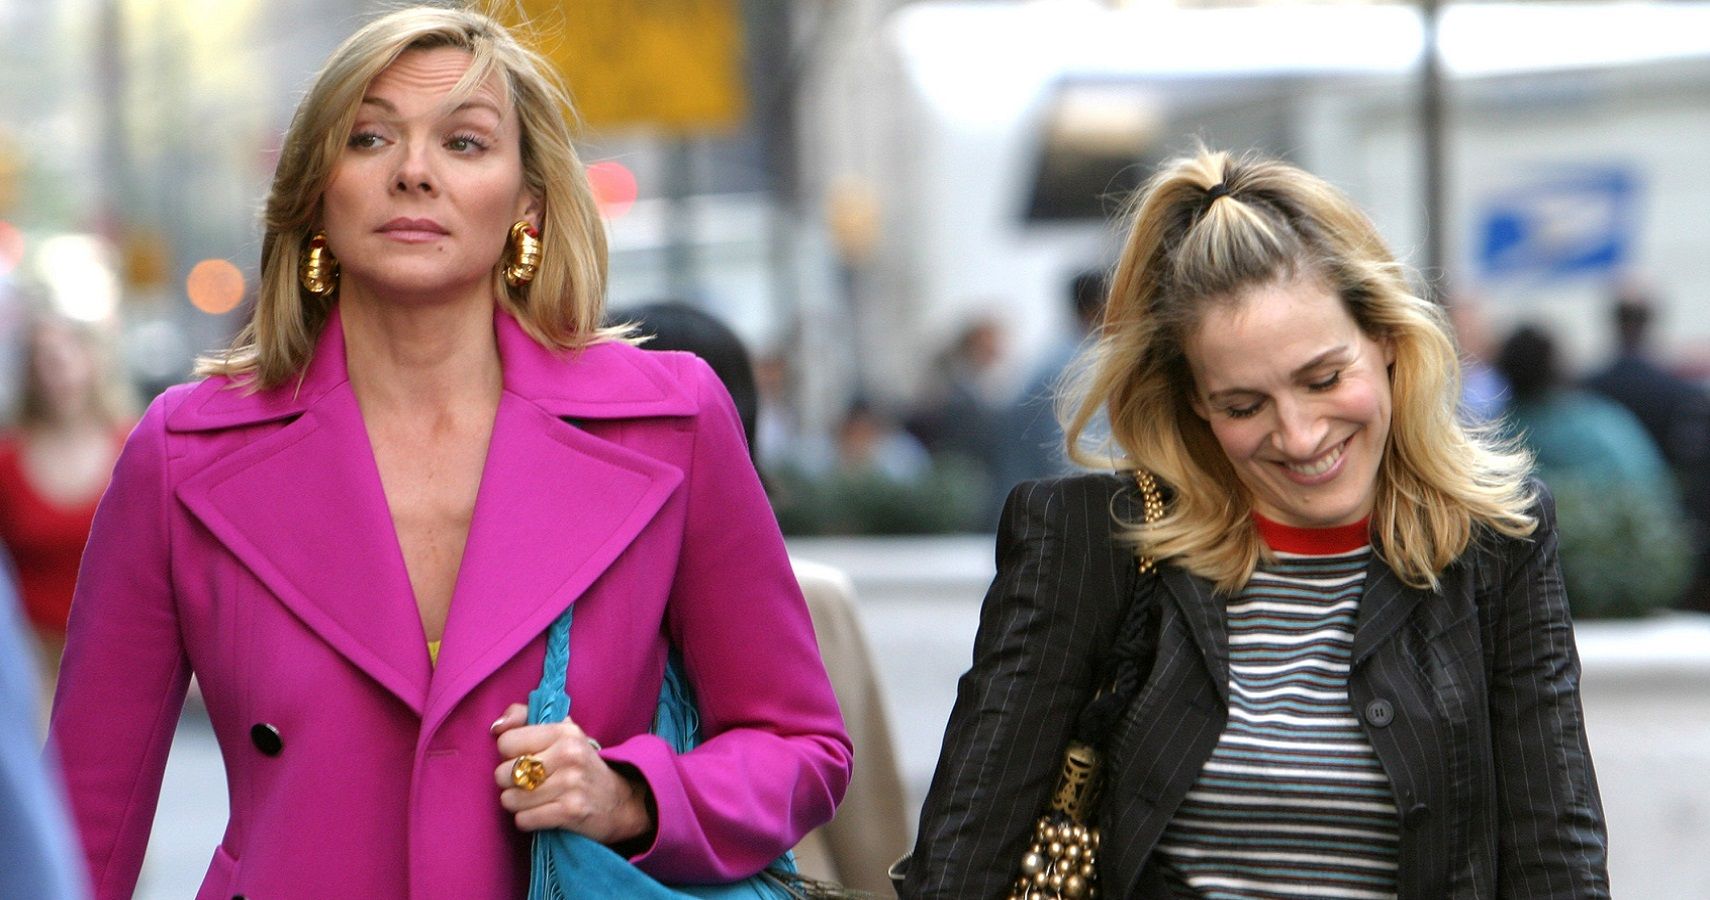 The Decades-Long Feud Of Sarah Jessica Parker & Kim Cattrall Continues